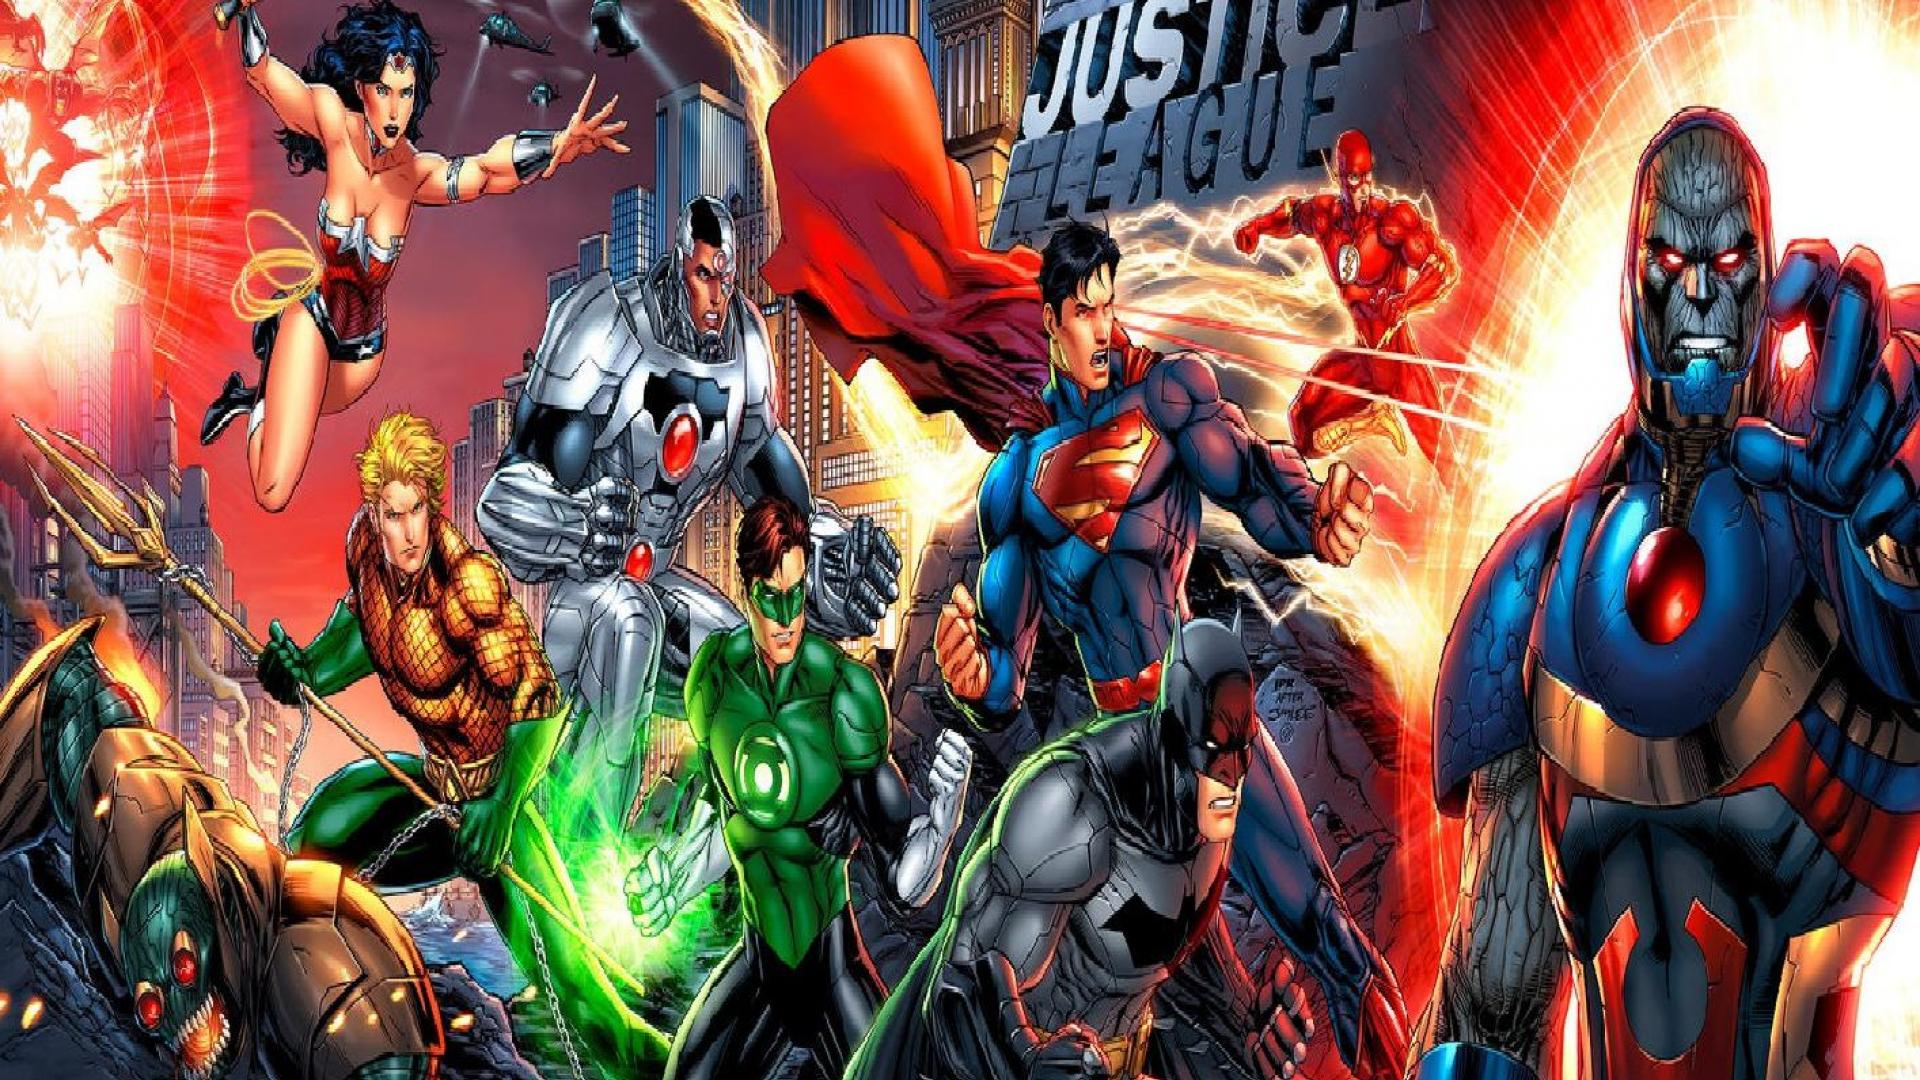 Justice league - (#157992) - High Quality and Resolution ...